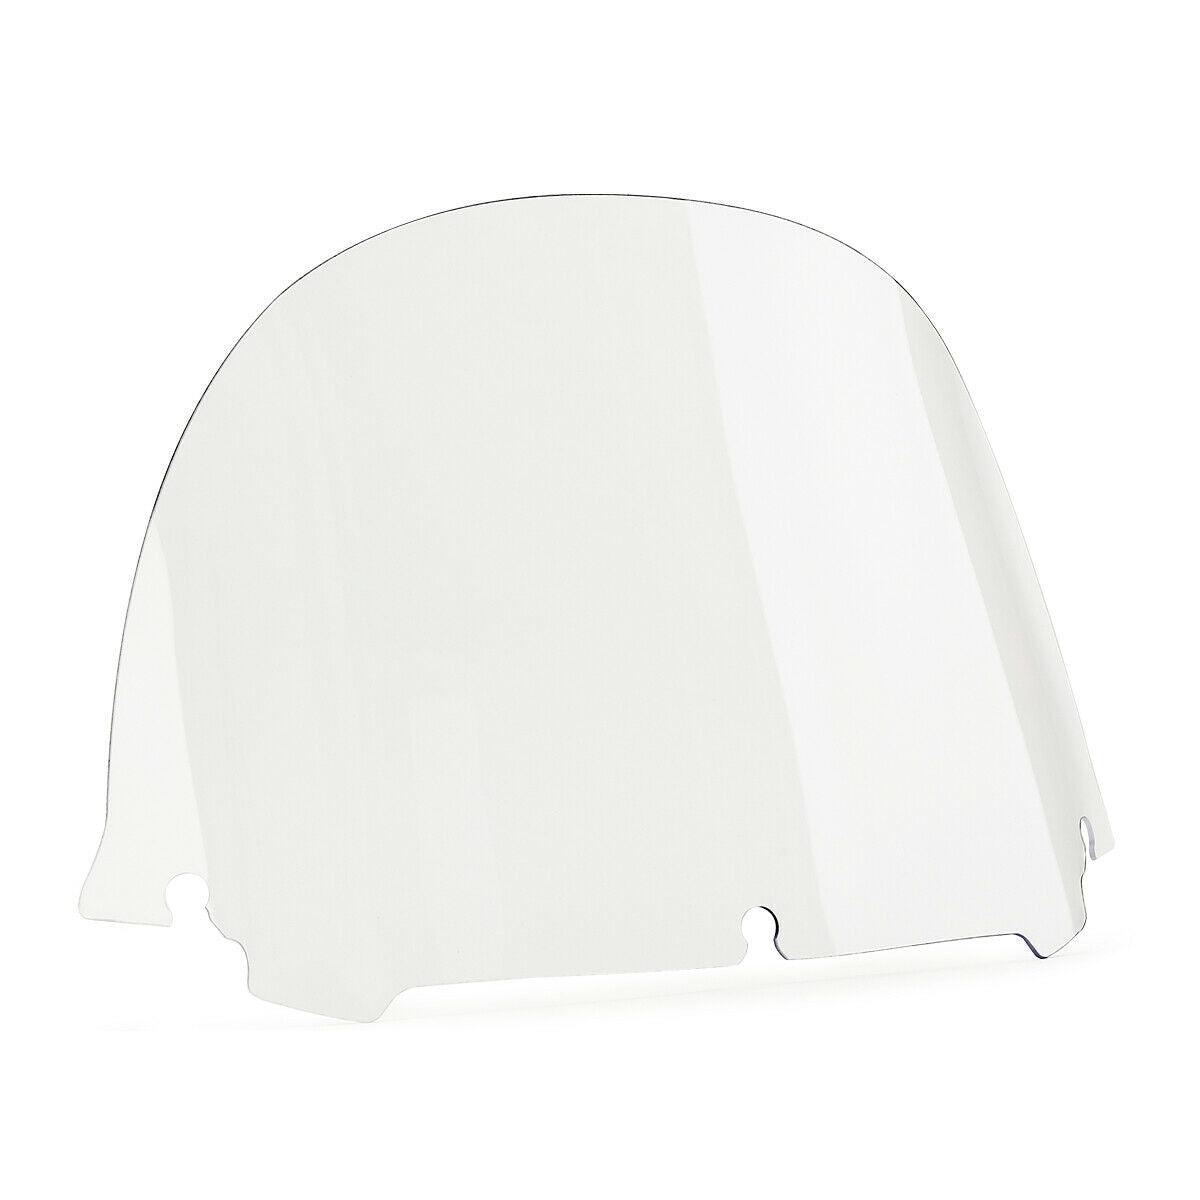 12.5" Clear Windscreen Windshield Fit For Harley Electra Street Glide 2014-2021 - Moto Life Products